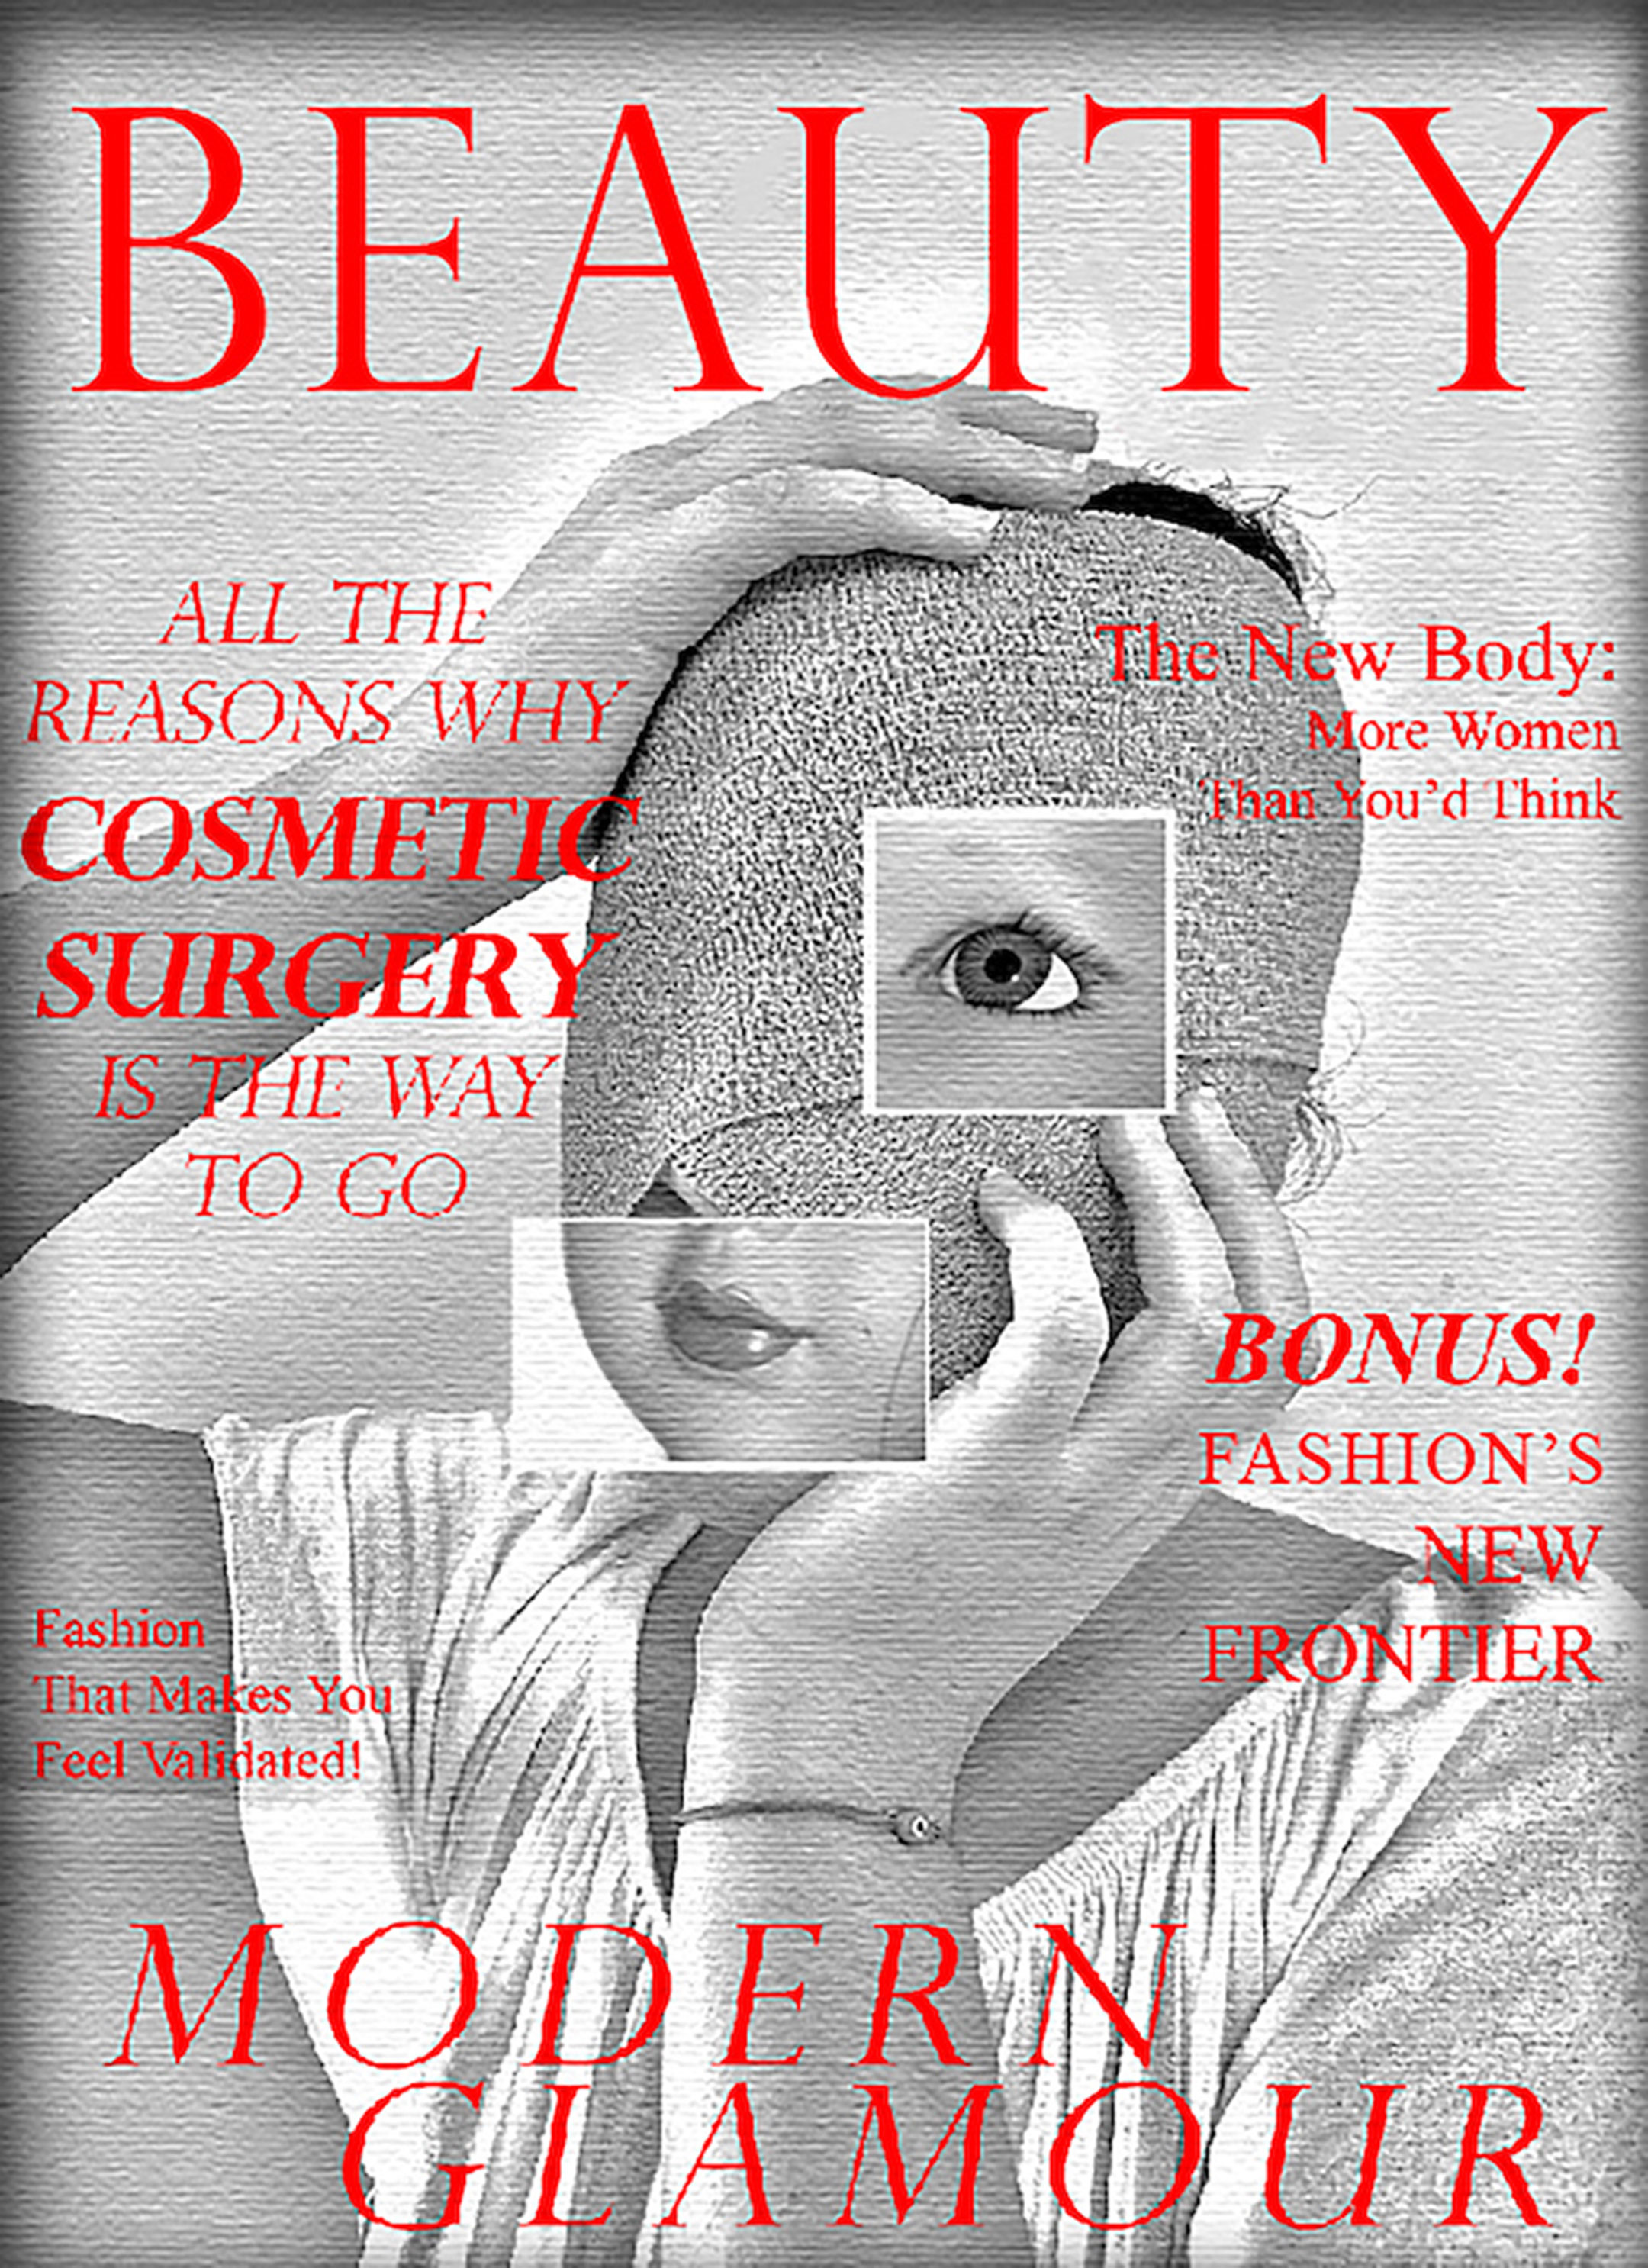 Mock magazine cover with the title Beauty and an image of a woman in black and white with a covering over her face, which is held by her hands, and a block highlighting an eye and another her mouth